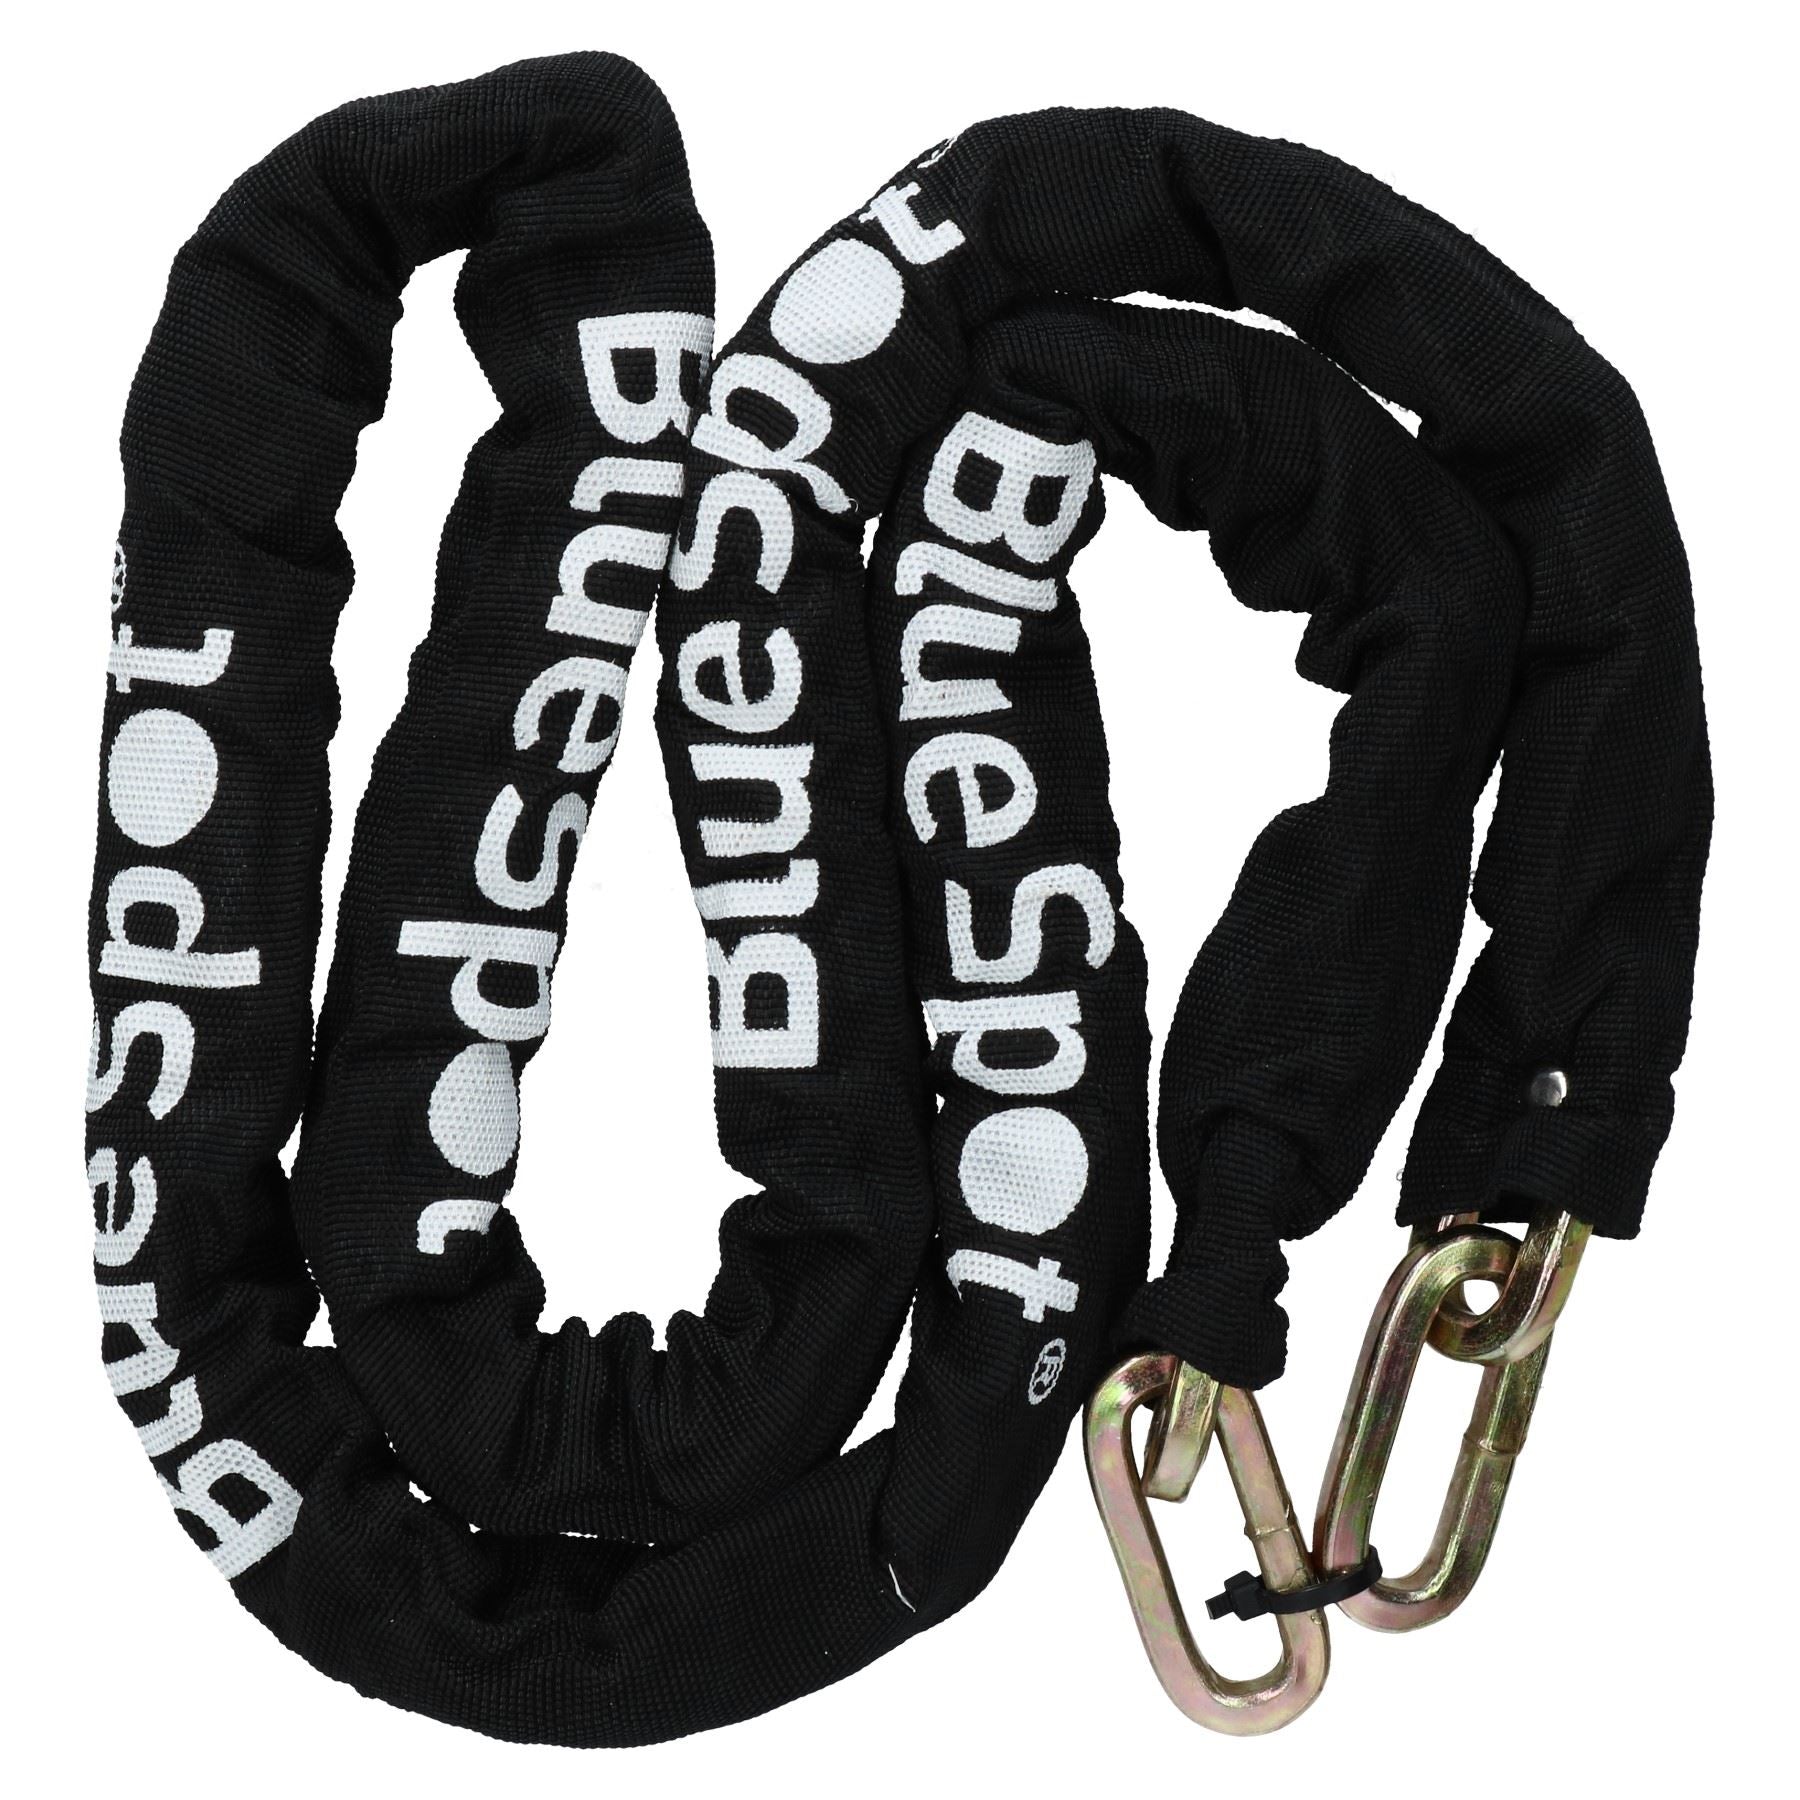 1.8 Metres x 8mm Square Link Heavy Duty Bike Security Chain with Nylon Cover